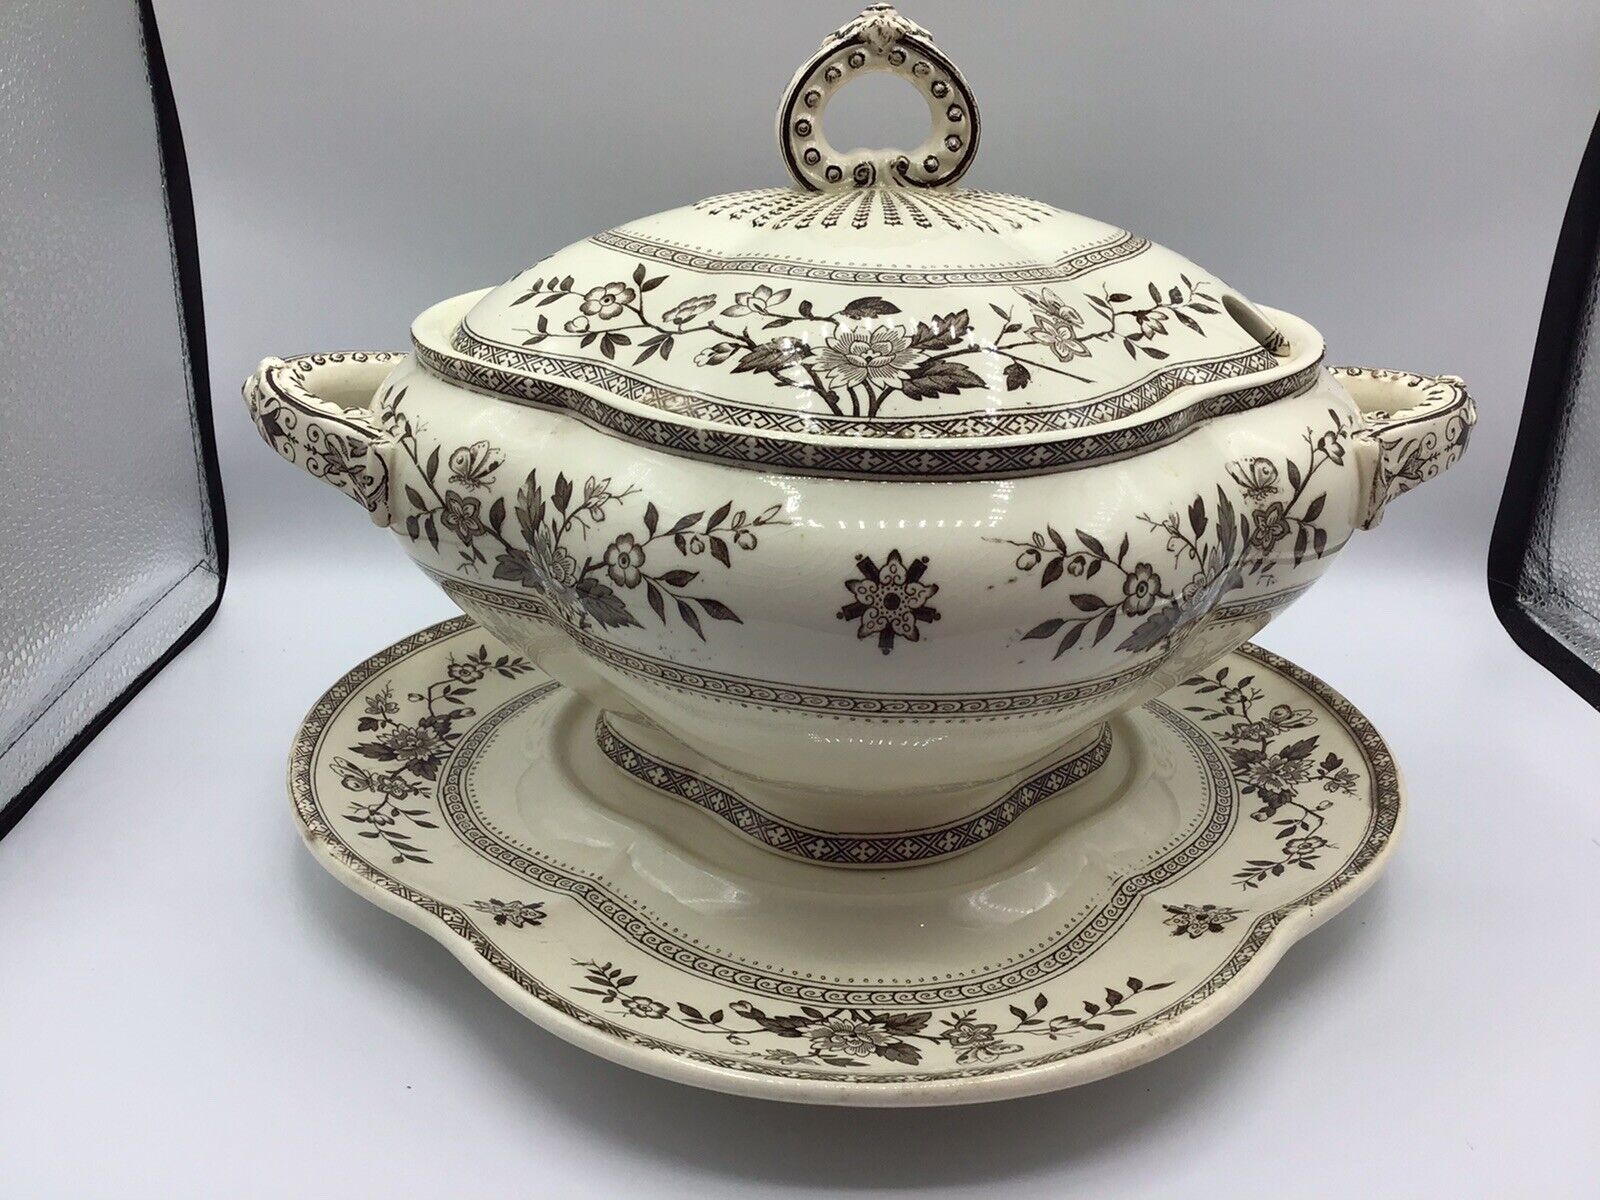 Beautiful Antique T. Furnival & Sons CEYLON Aesthetic Period Tureen, Lid & Plate